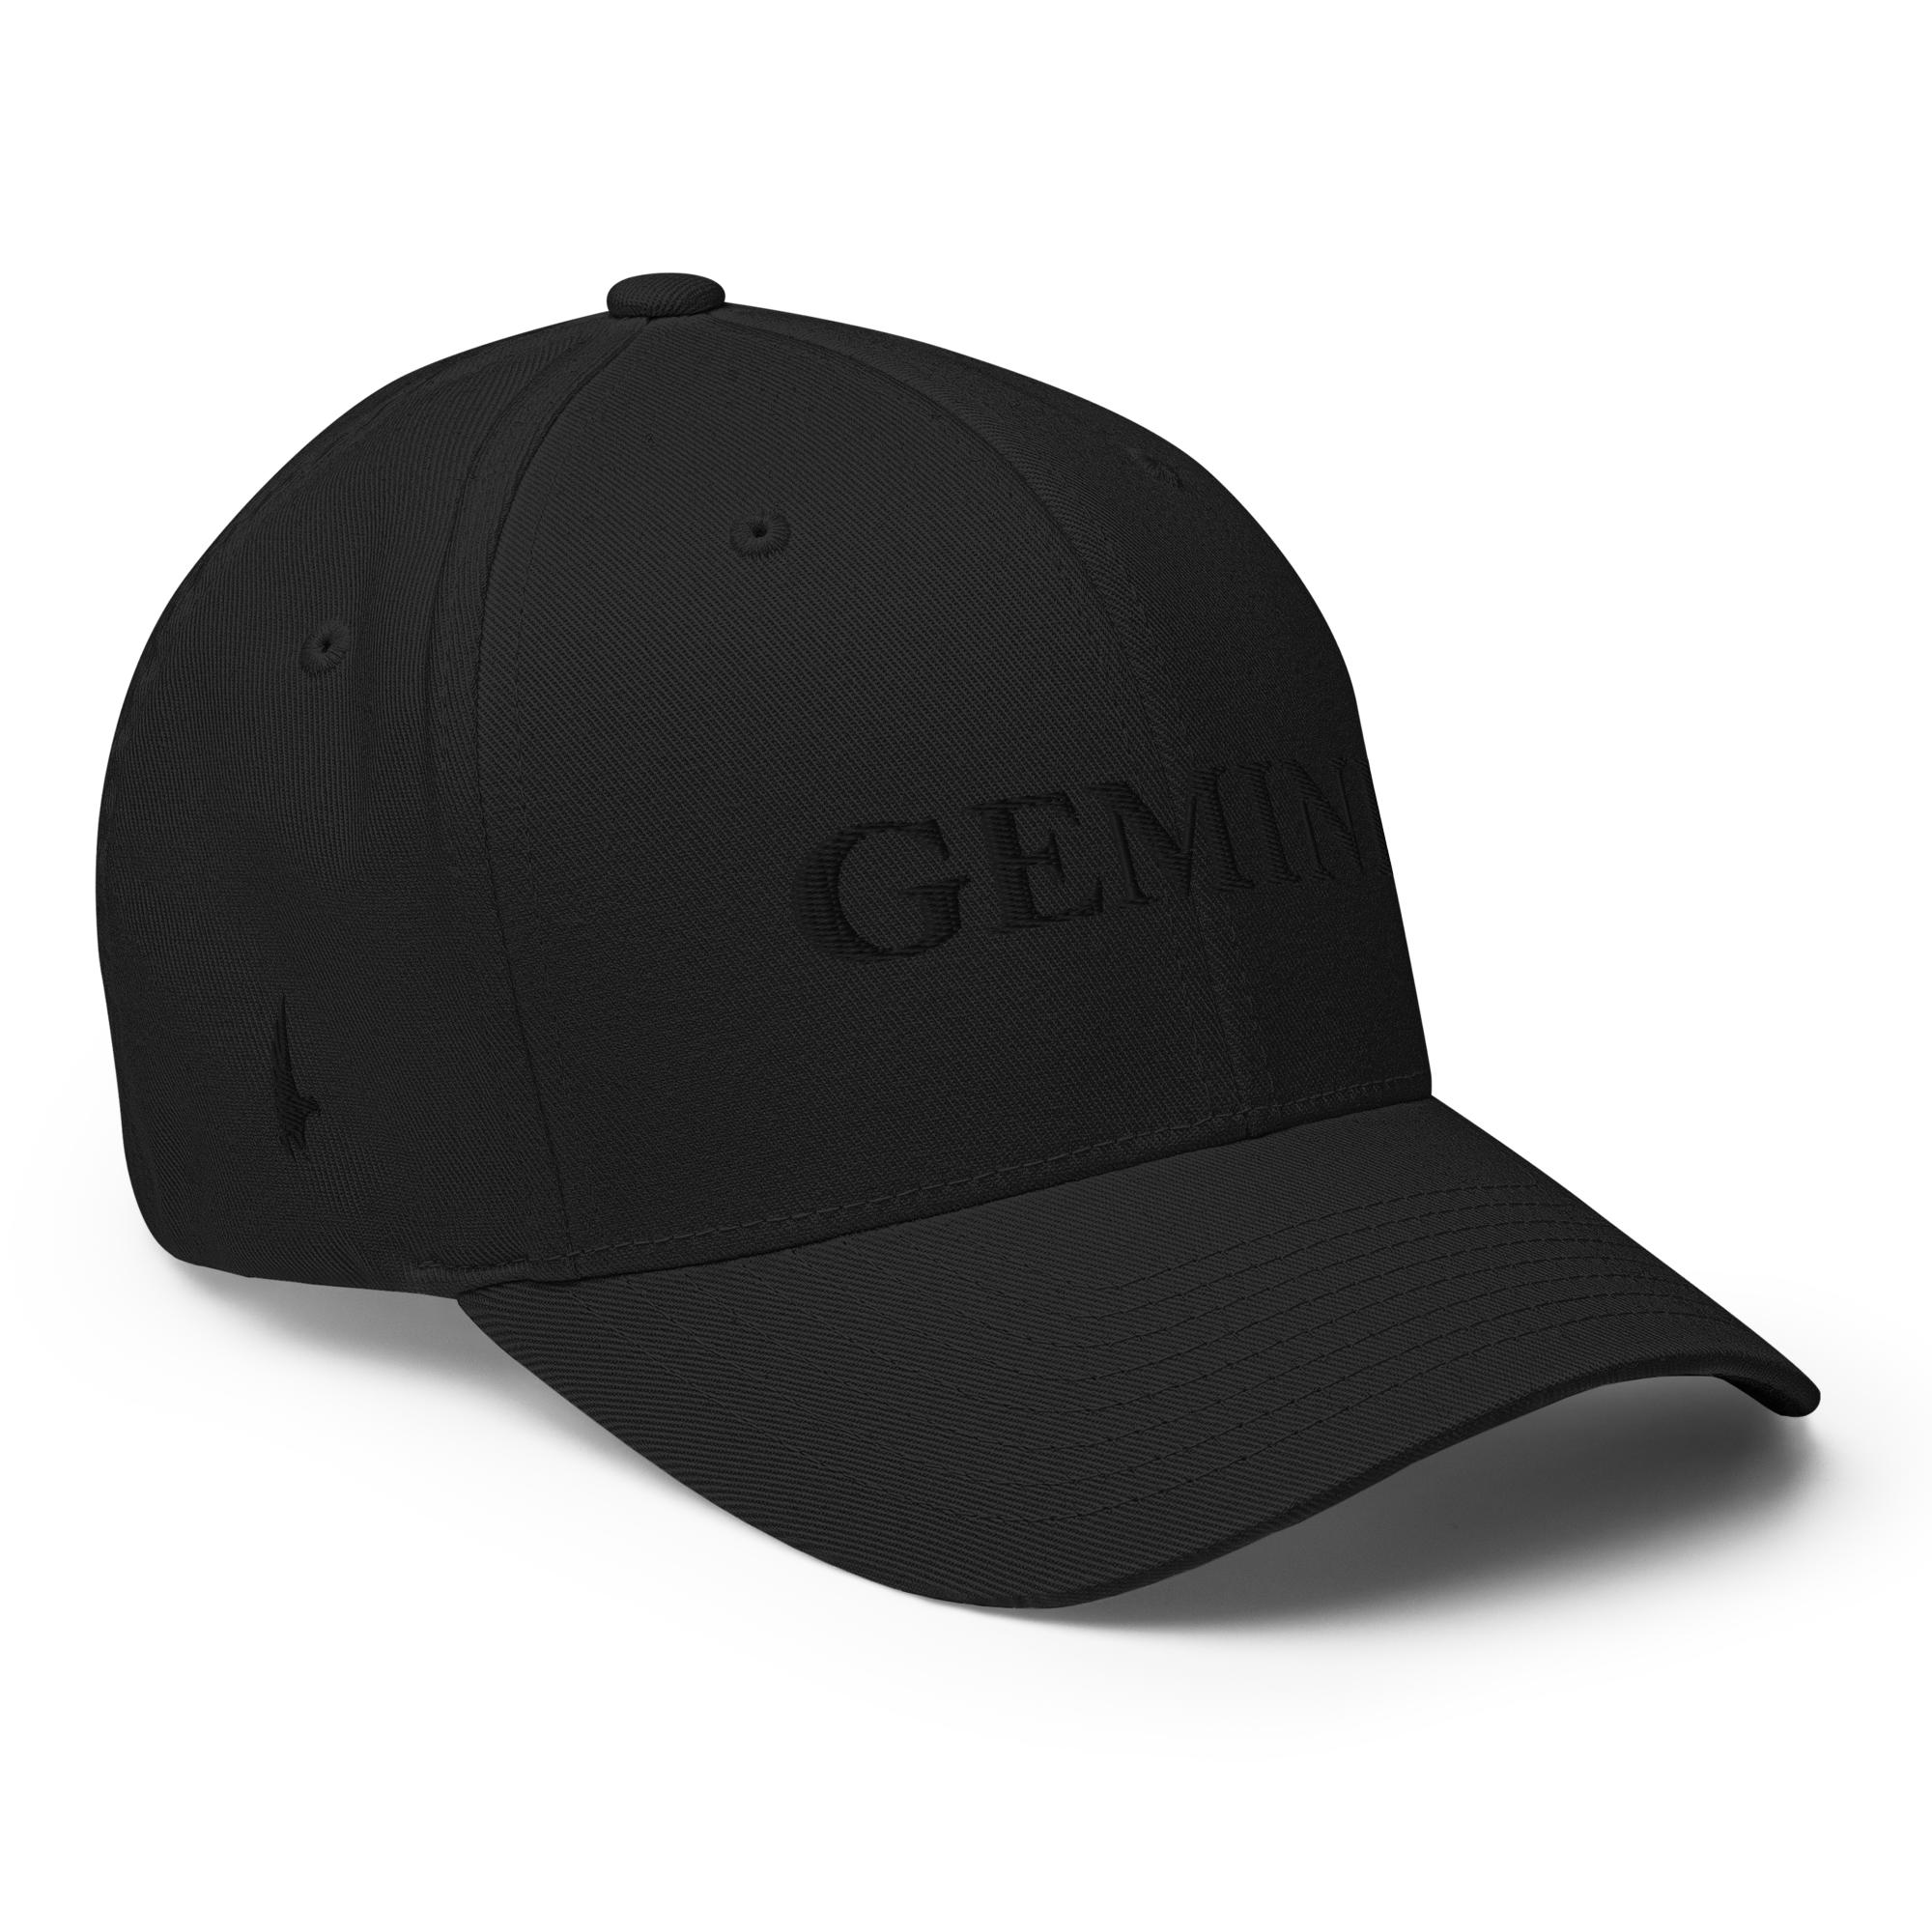 Original Gemini Fitted Hat Black Black Fitted - Loyalty Vibes